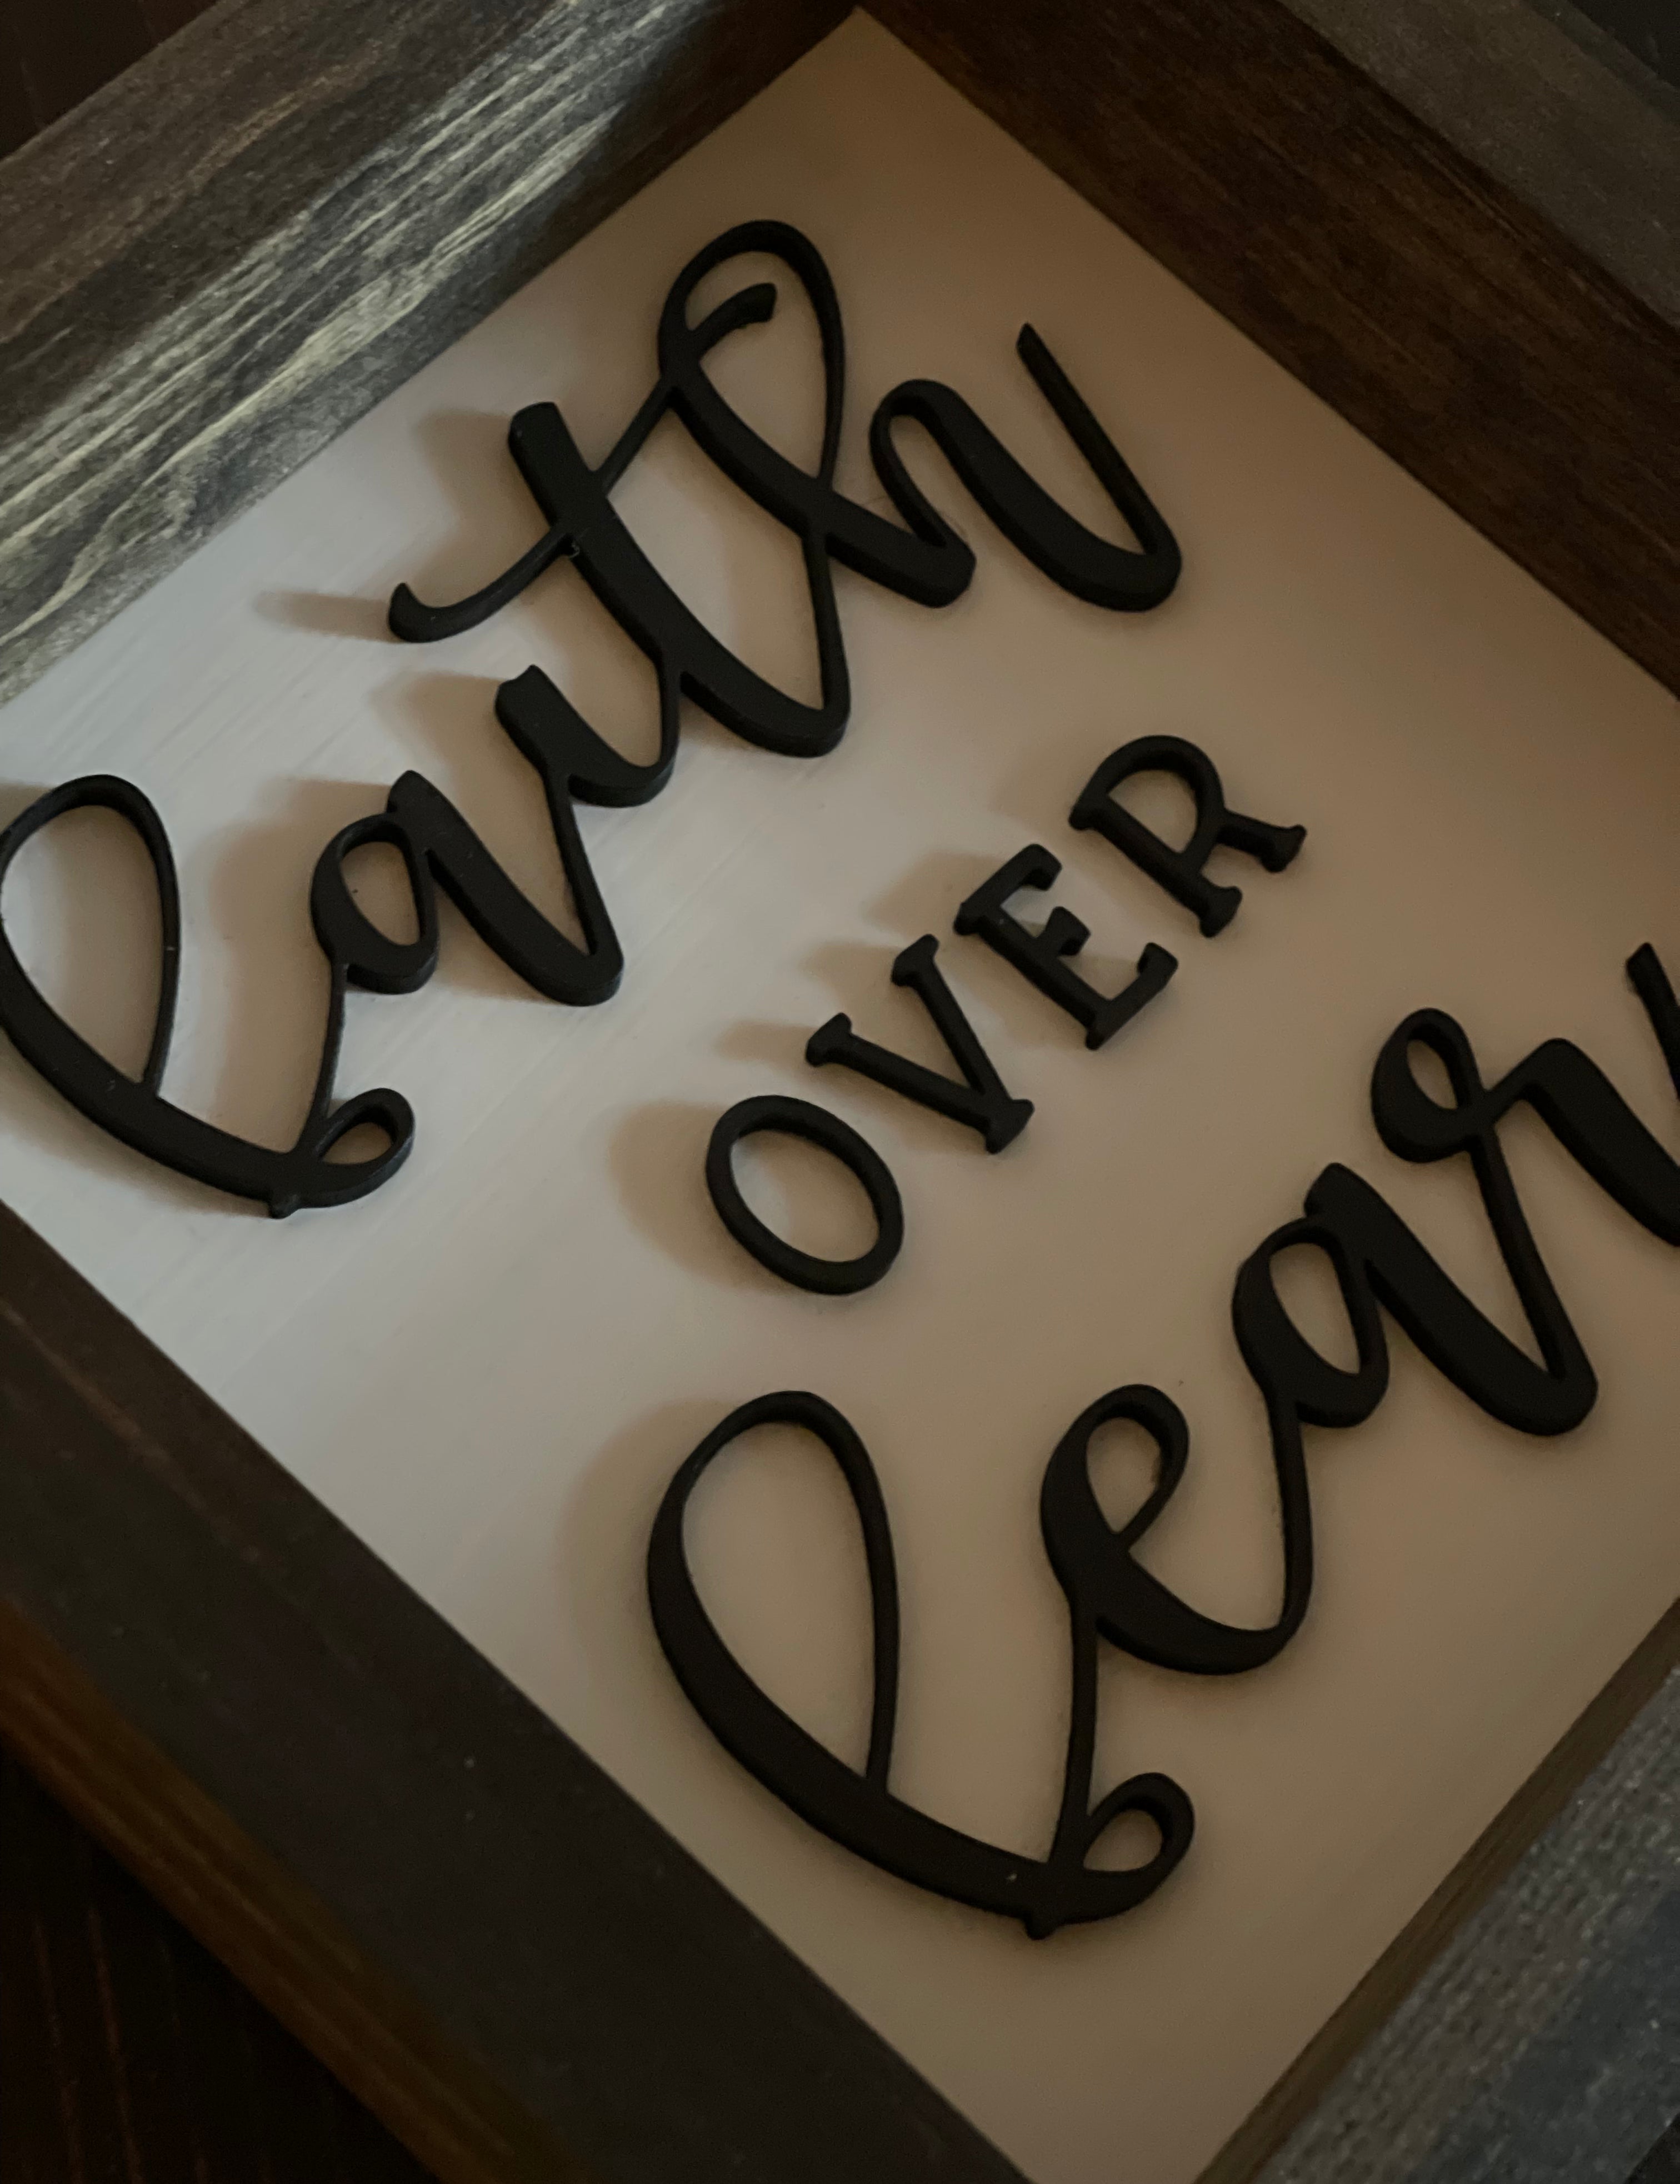 This image shows the 3D lettering up close.